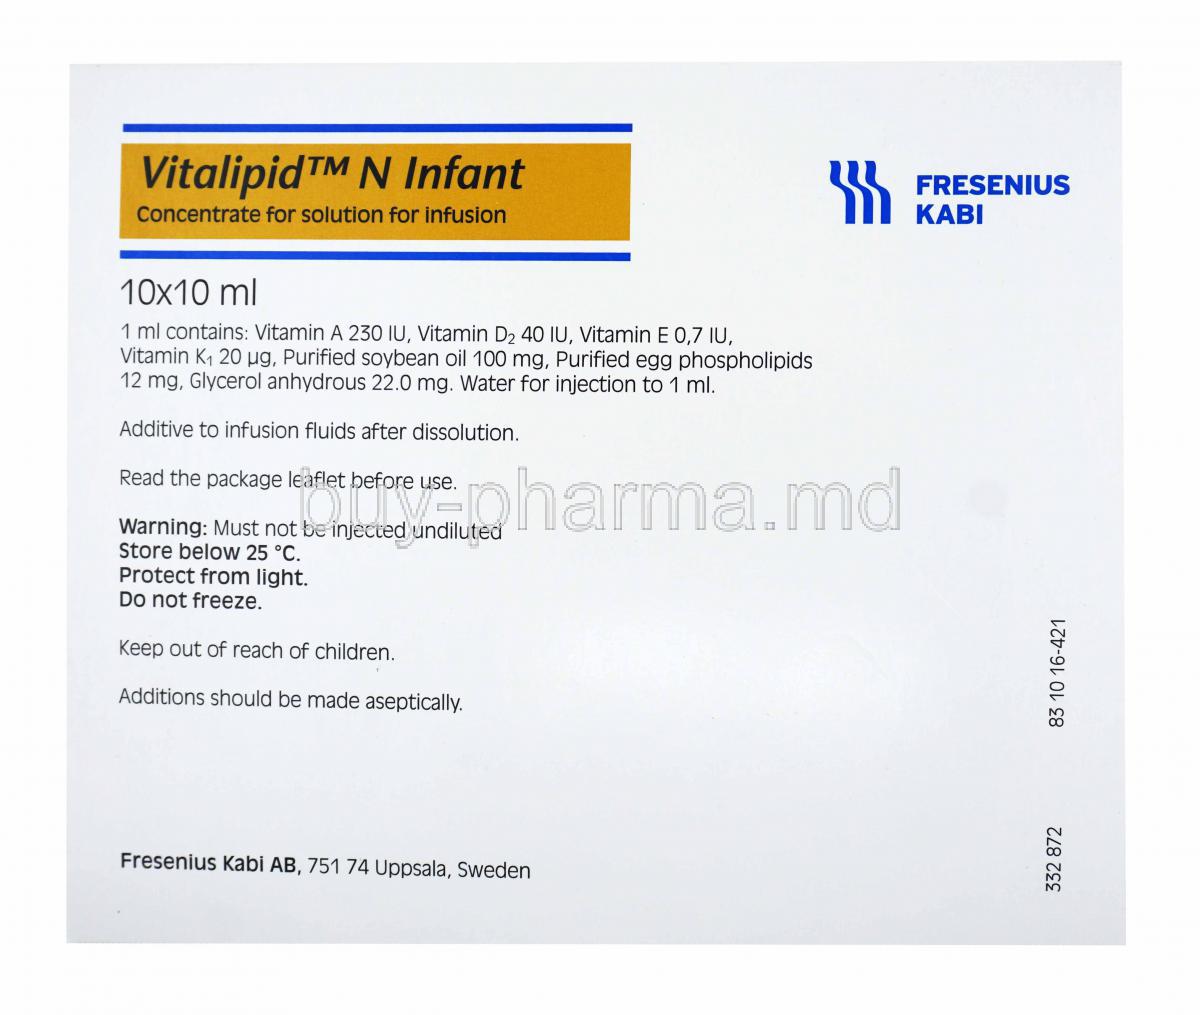 Vitalipid N Infant, Concentrate for solution for infusion, 10x10ml, Fresenius Kabi, Box front presentation